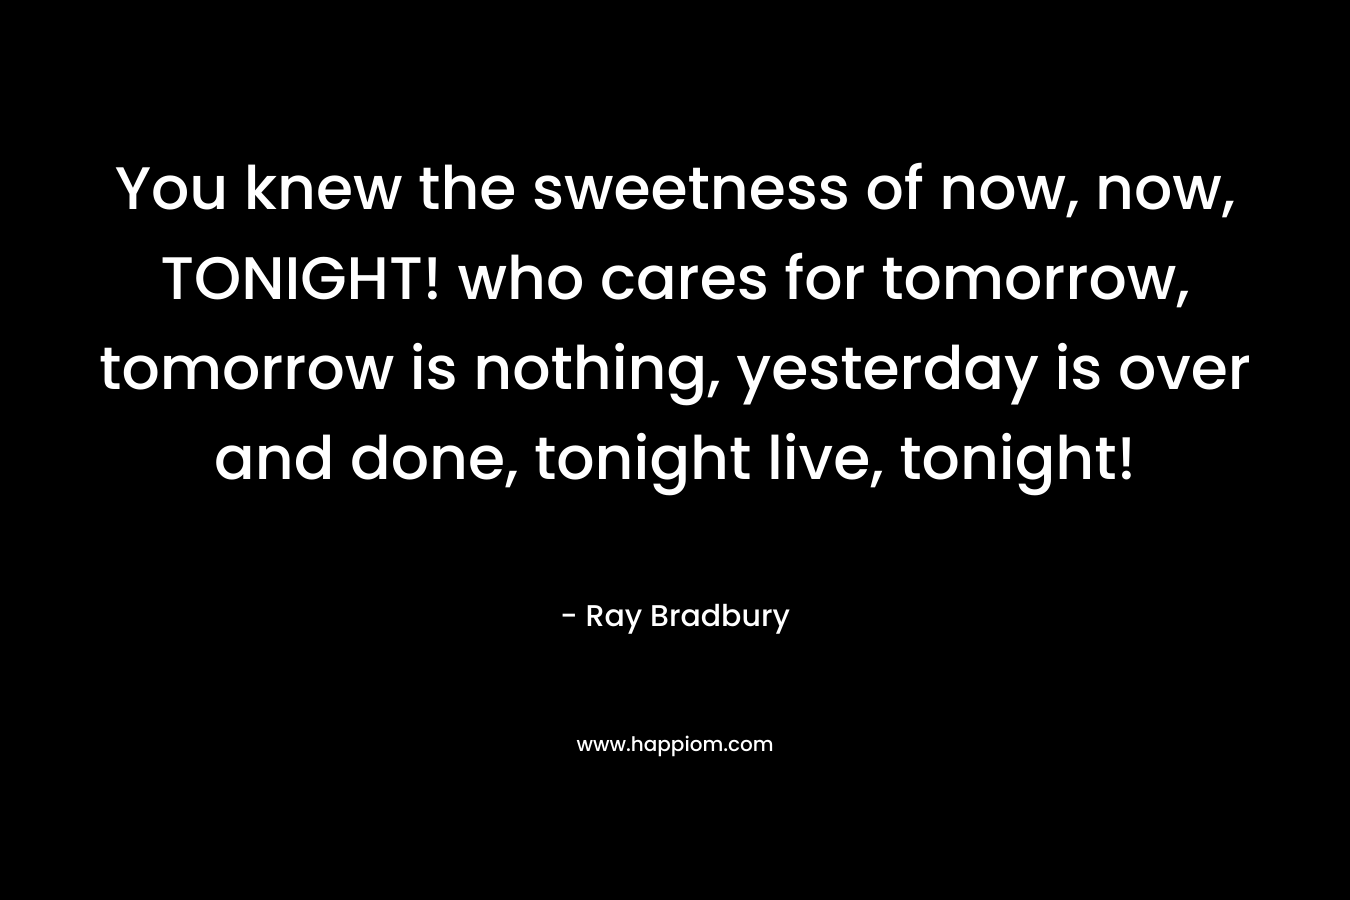 You knew the sweetness of now, now, TONIGHT! who cares for tomorrow, tomorrow is nothing, yesterday is over and done, tonight live, tonight!